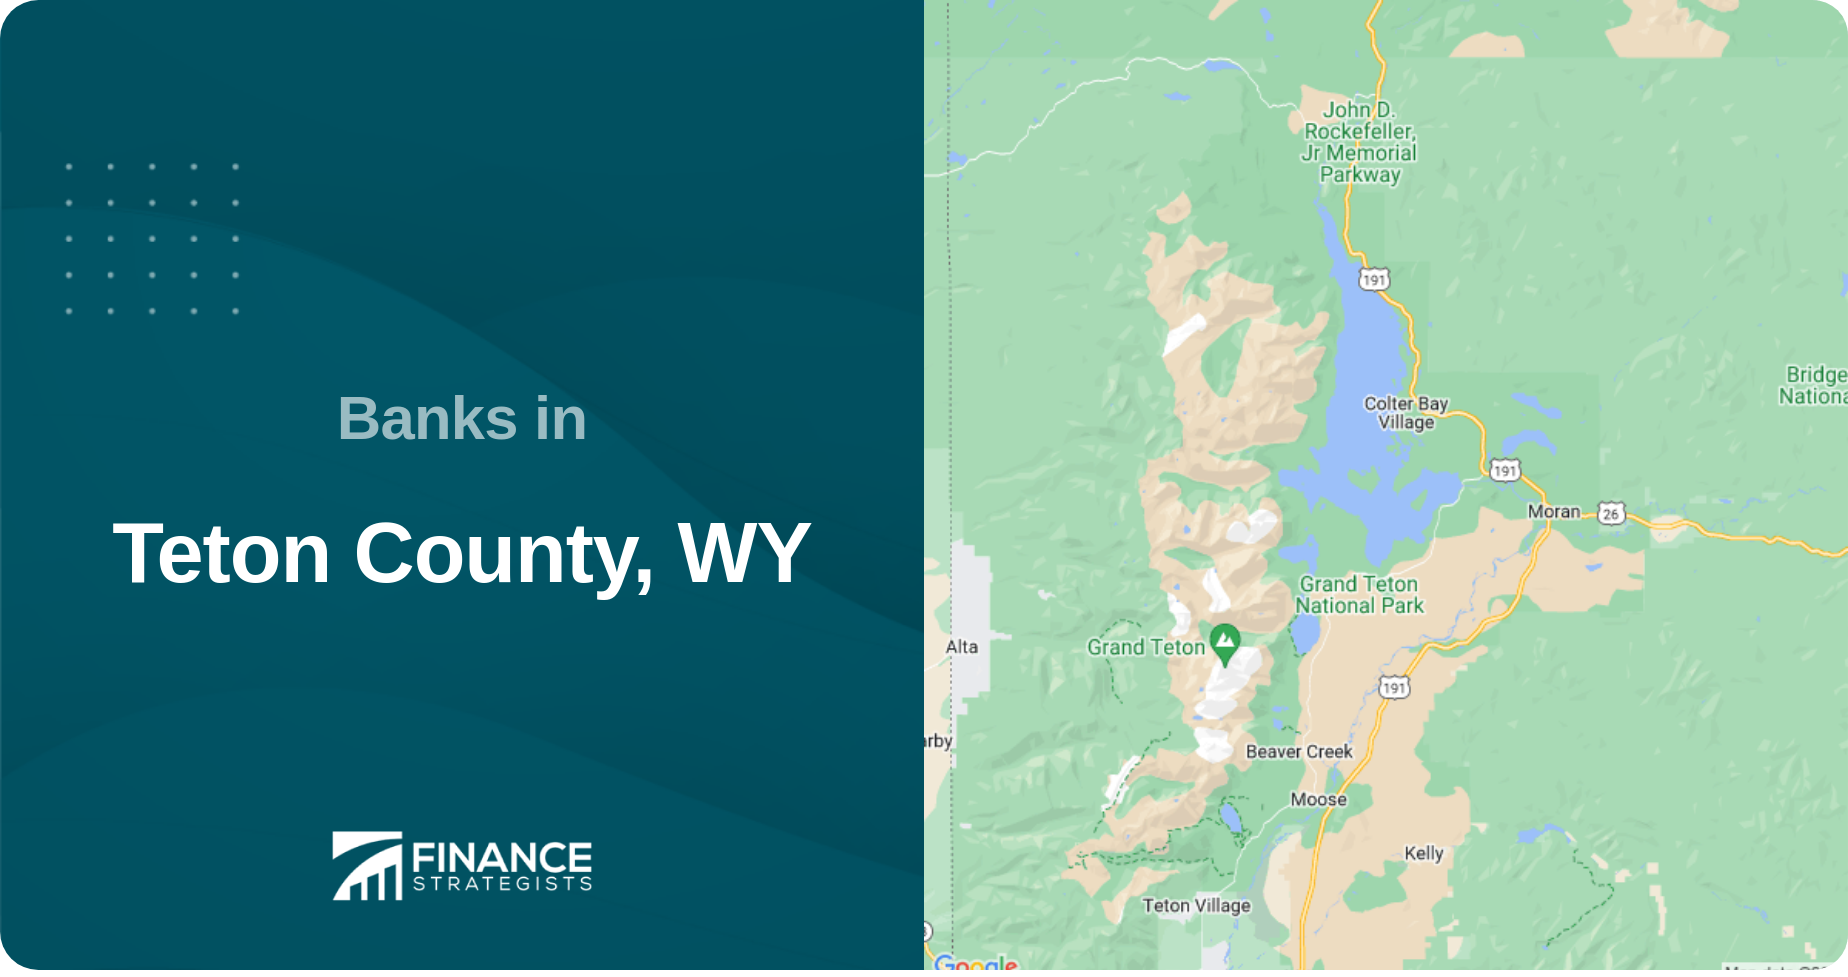 Banks in Teton County, WY